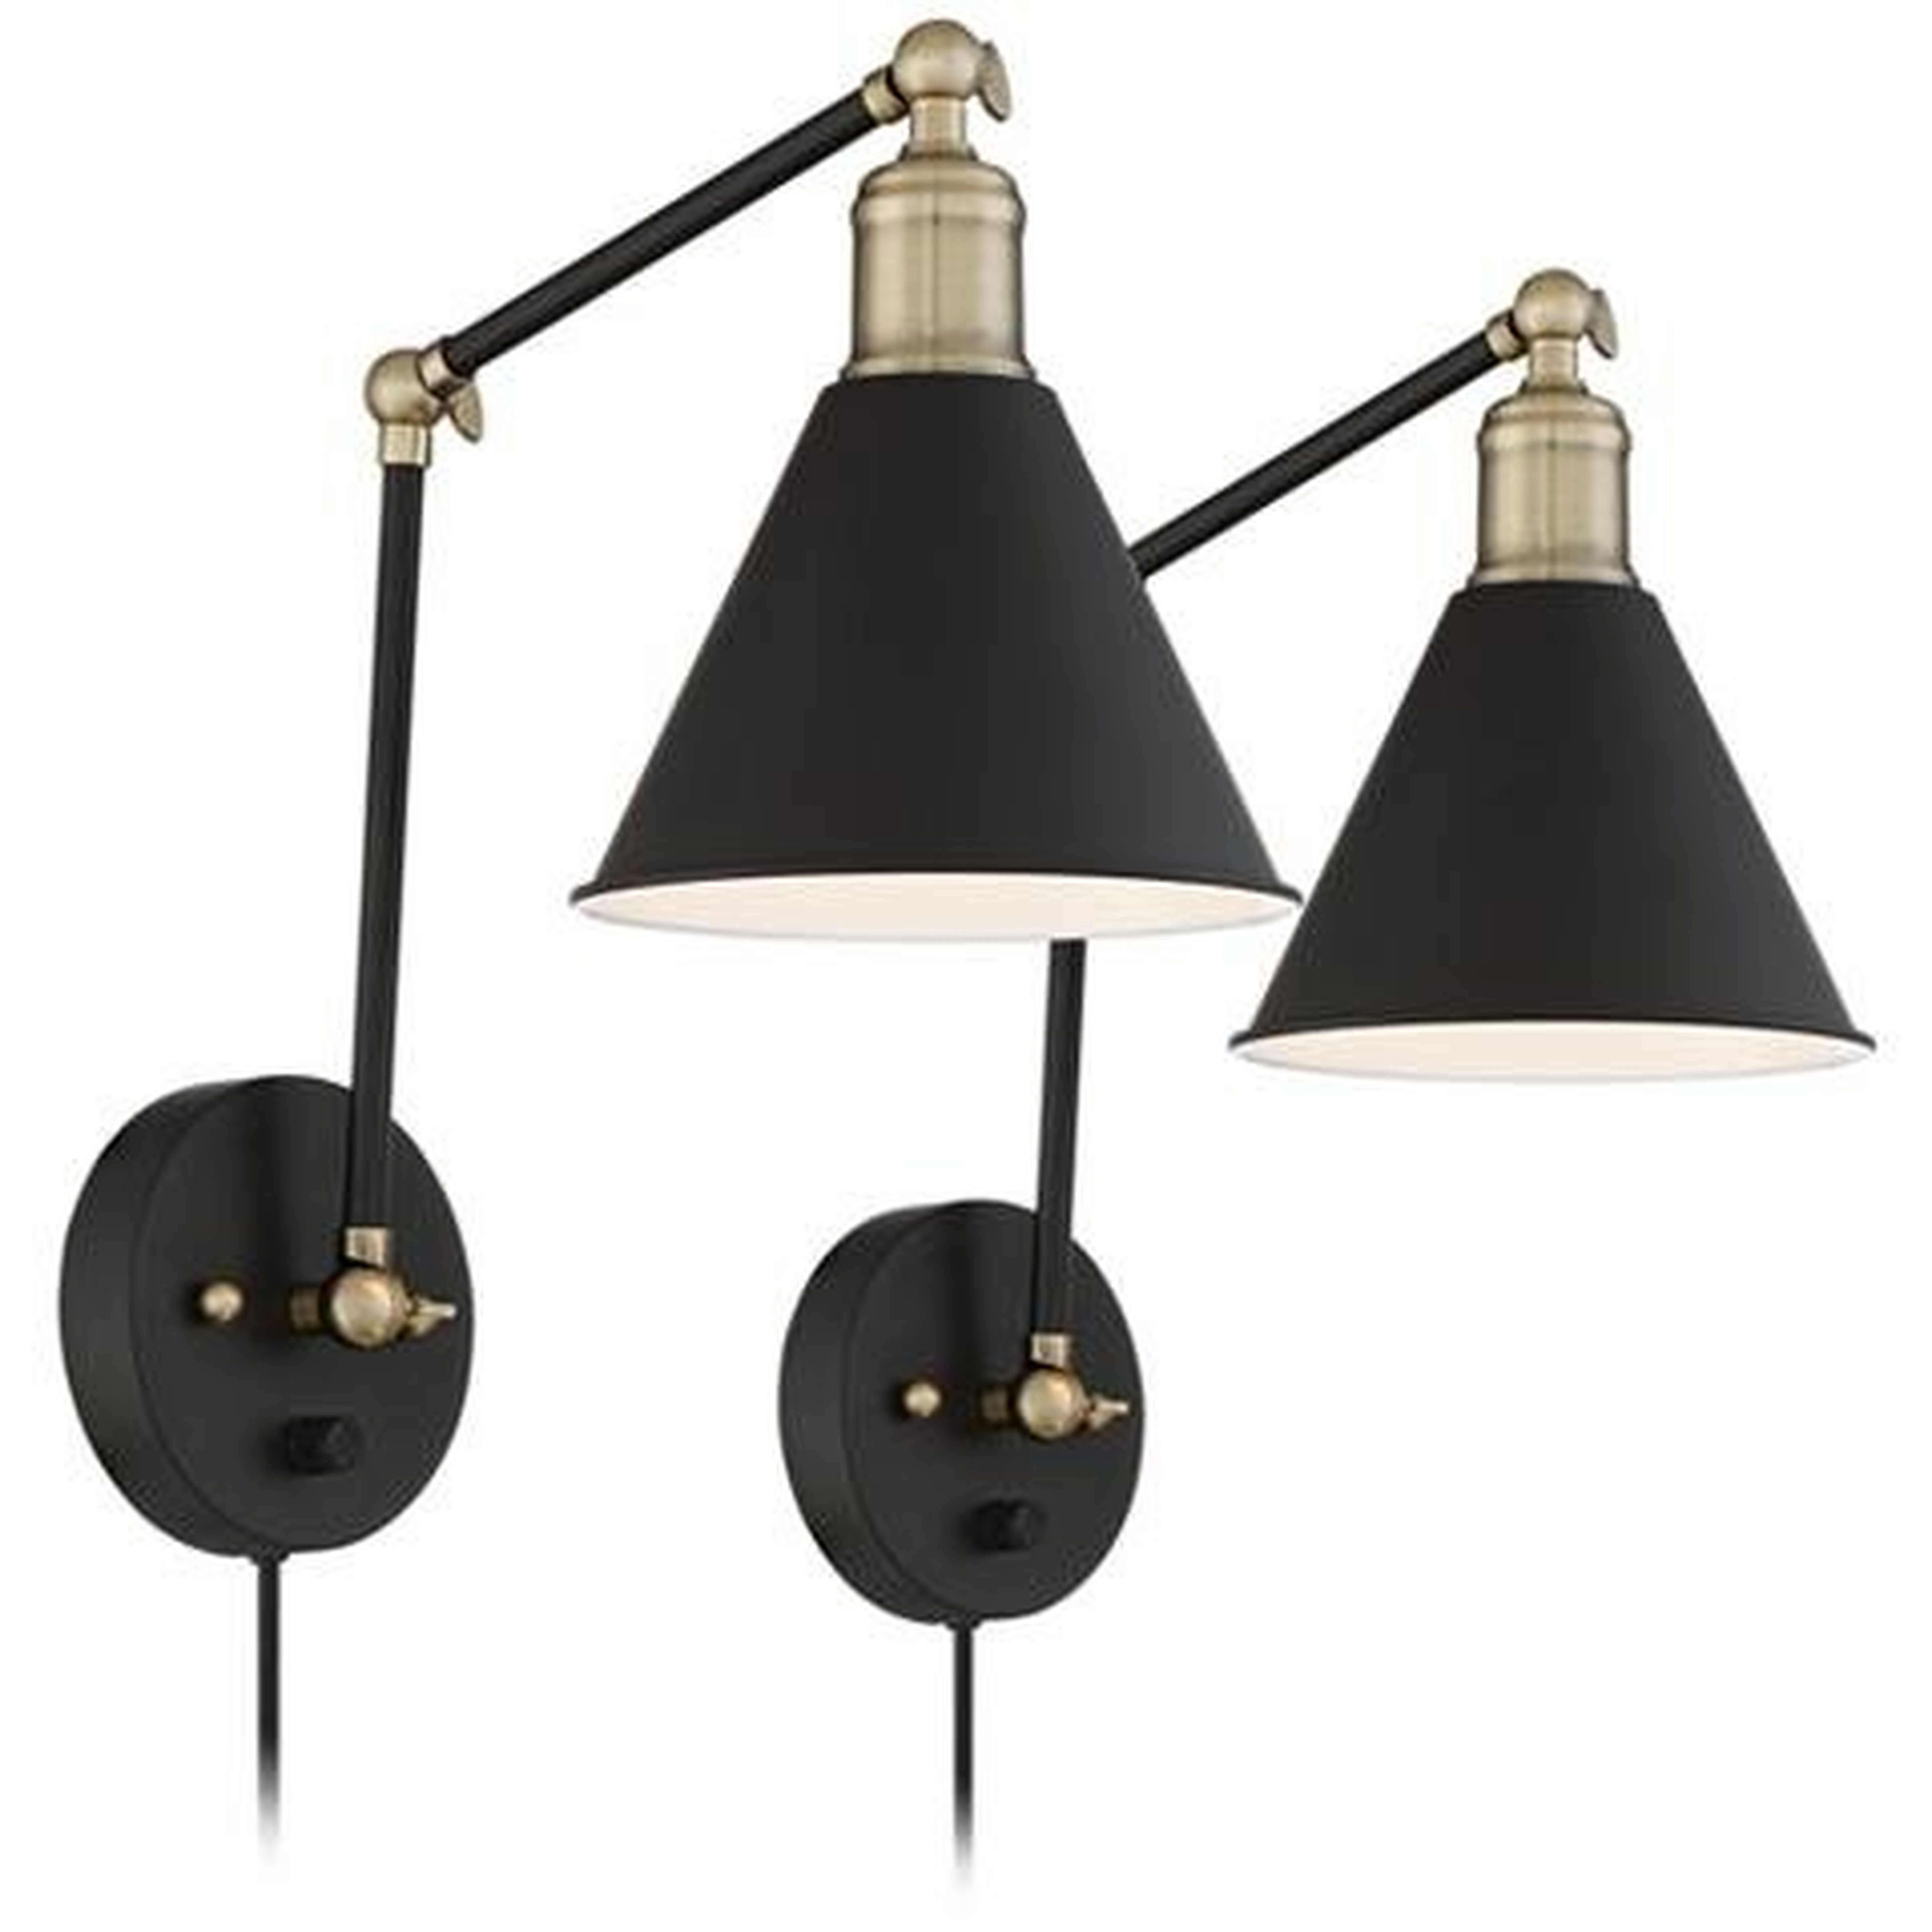 360 Lighting Wray Black and Antique Brass Plug-In Wall Lamps Set of 2 - Lamps Plus